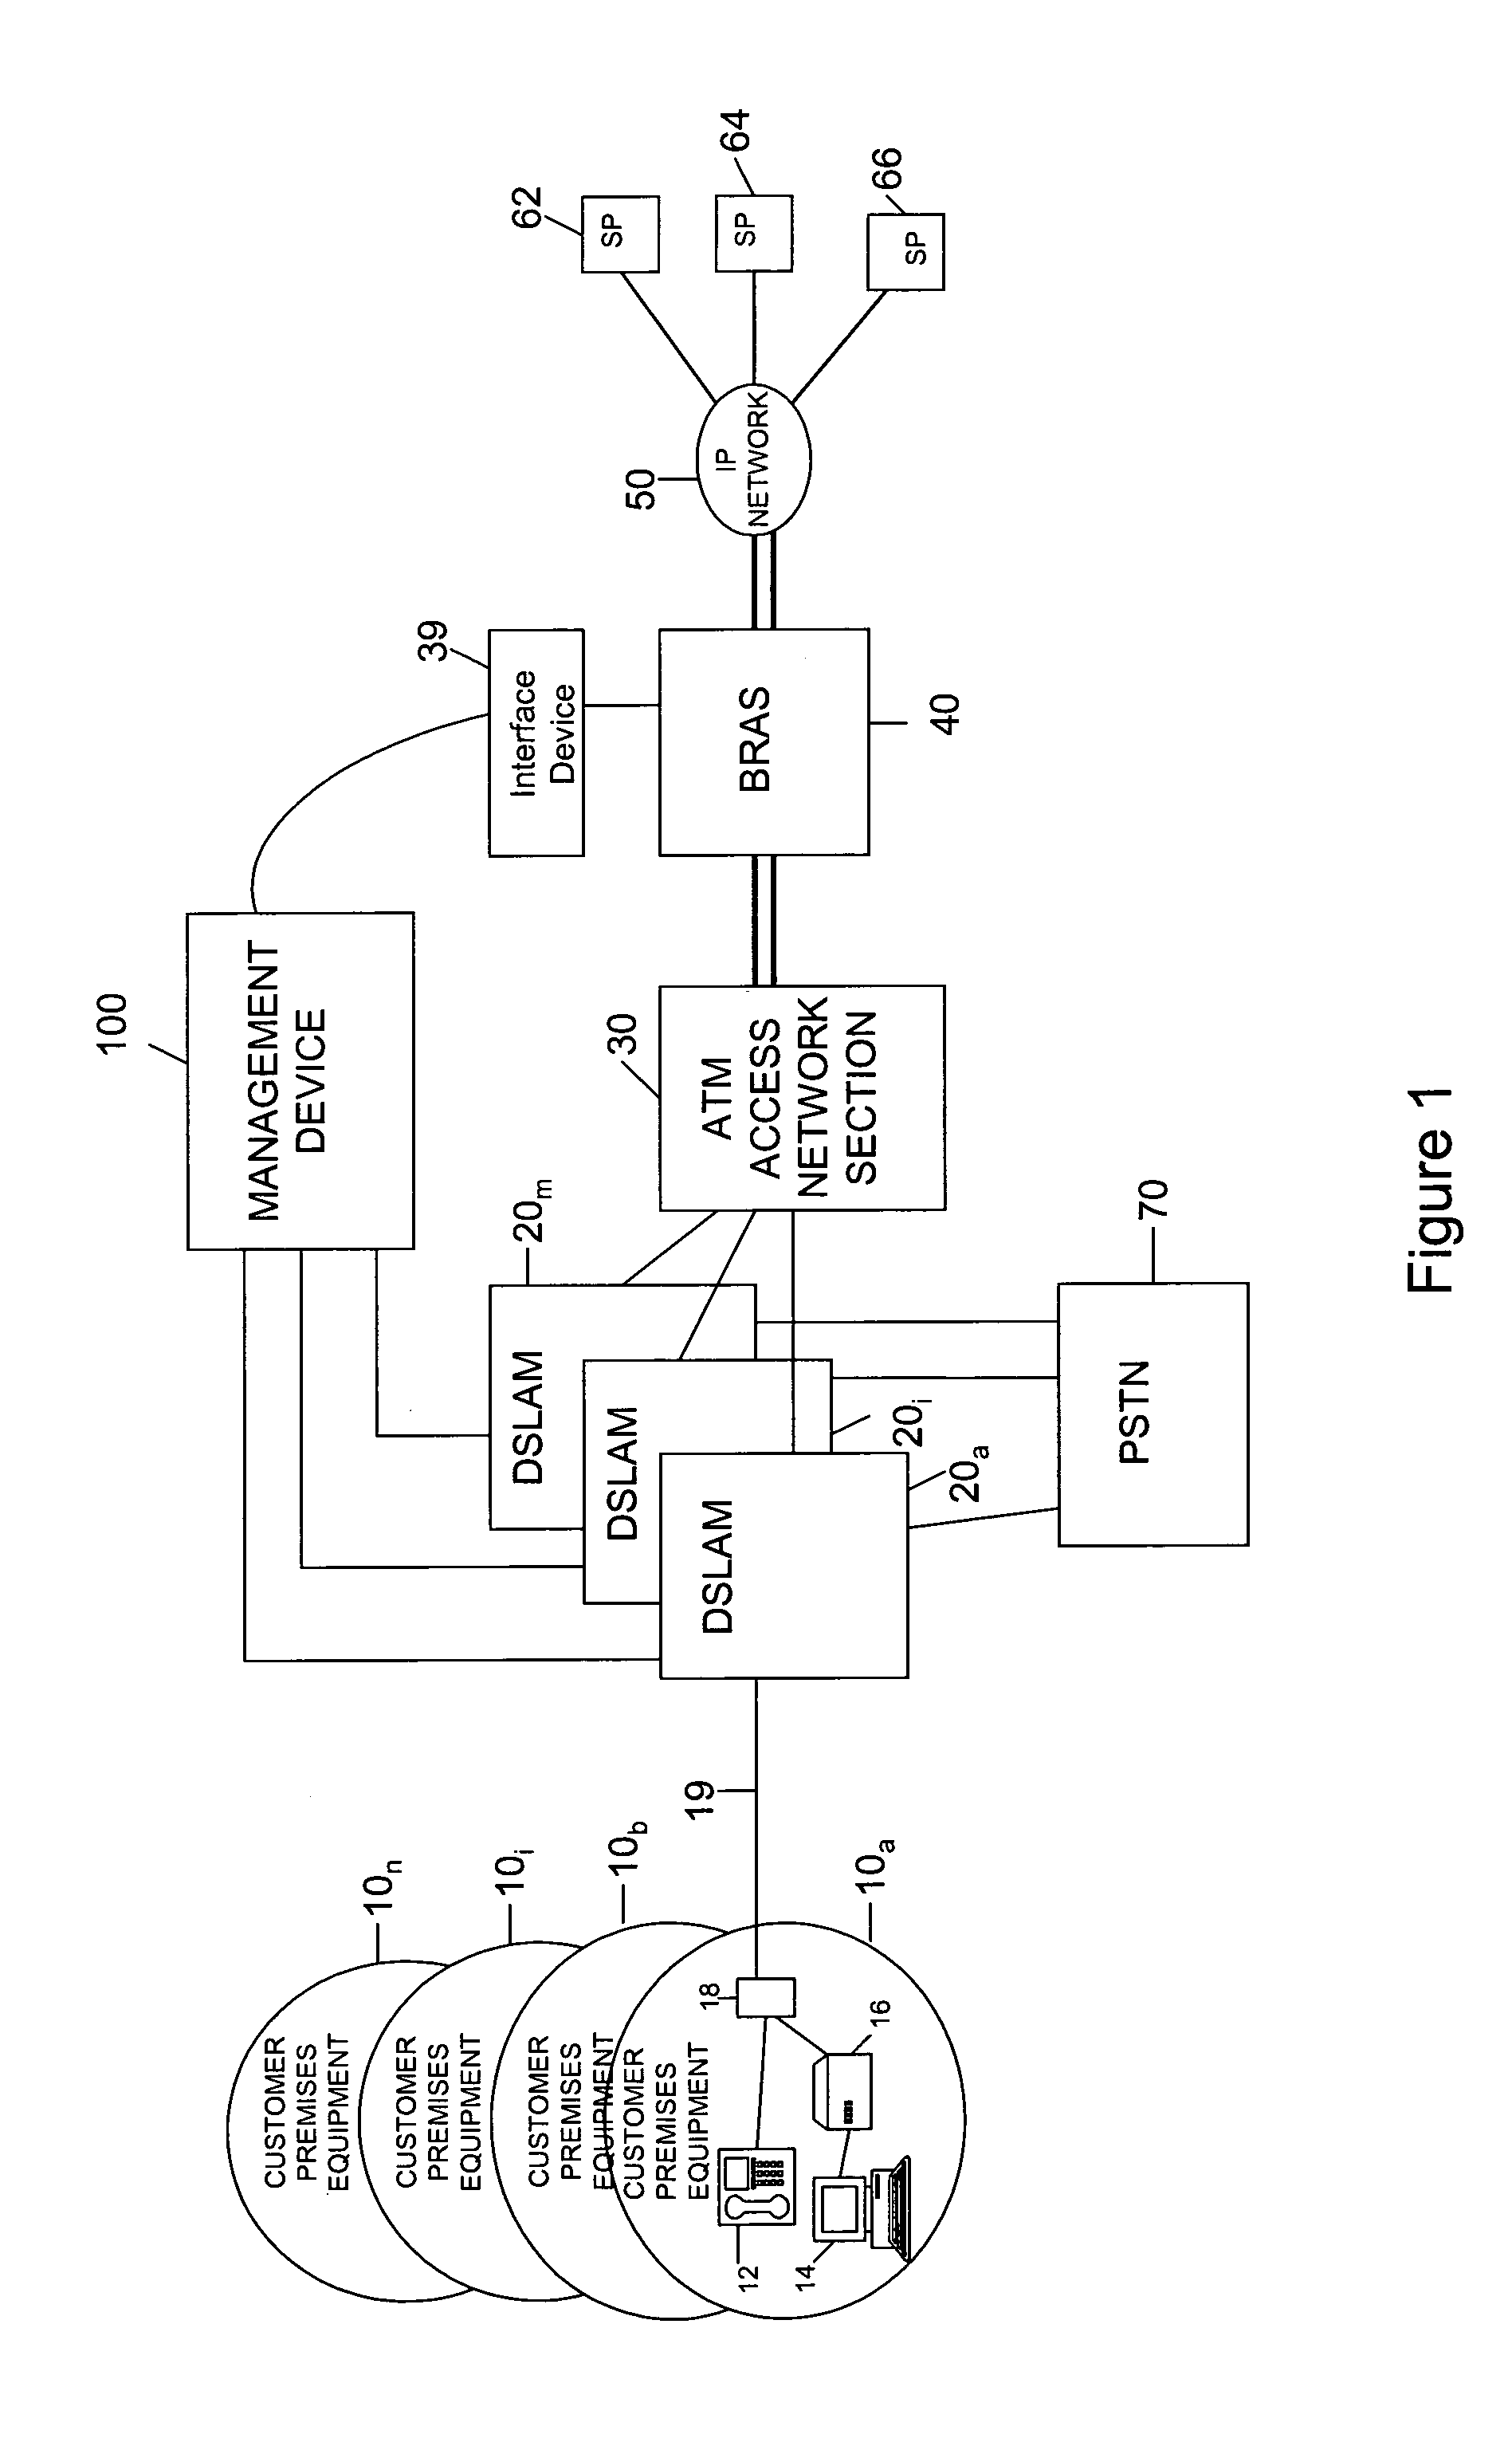 Dynamic line management of digital subscriber line connections